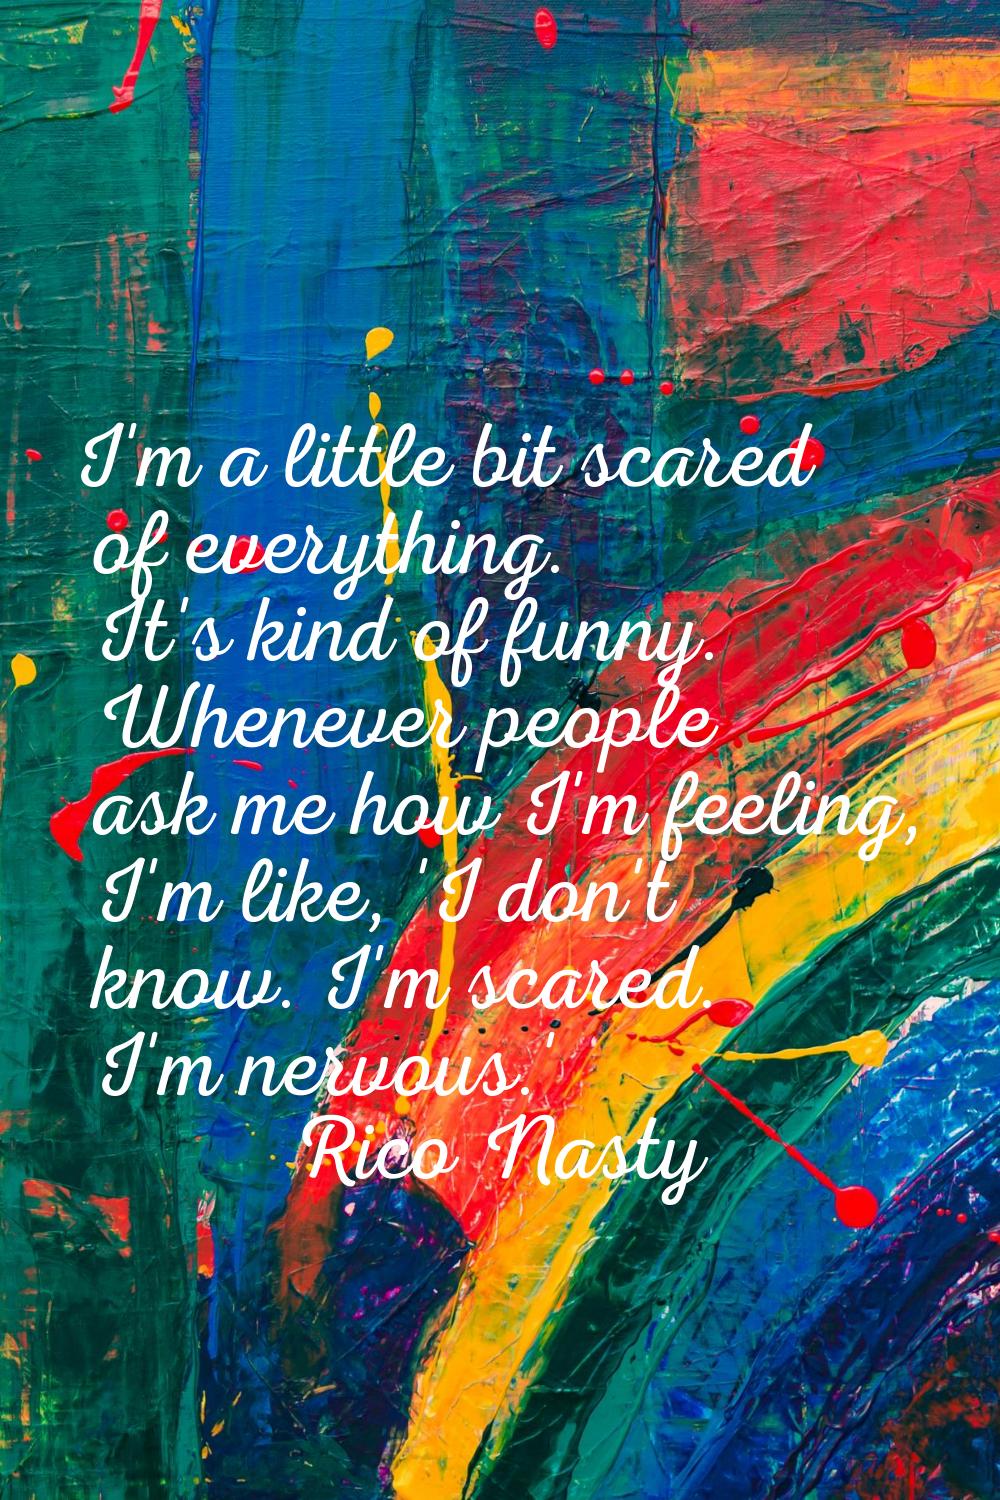 I'm a little bit scared of everything. It's kind of funny. Whenever people ask me how I'm feeling, 